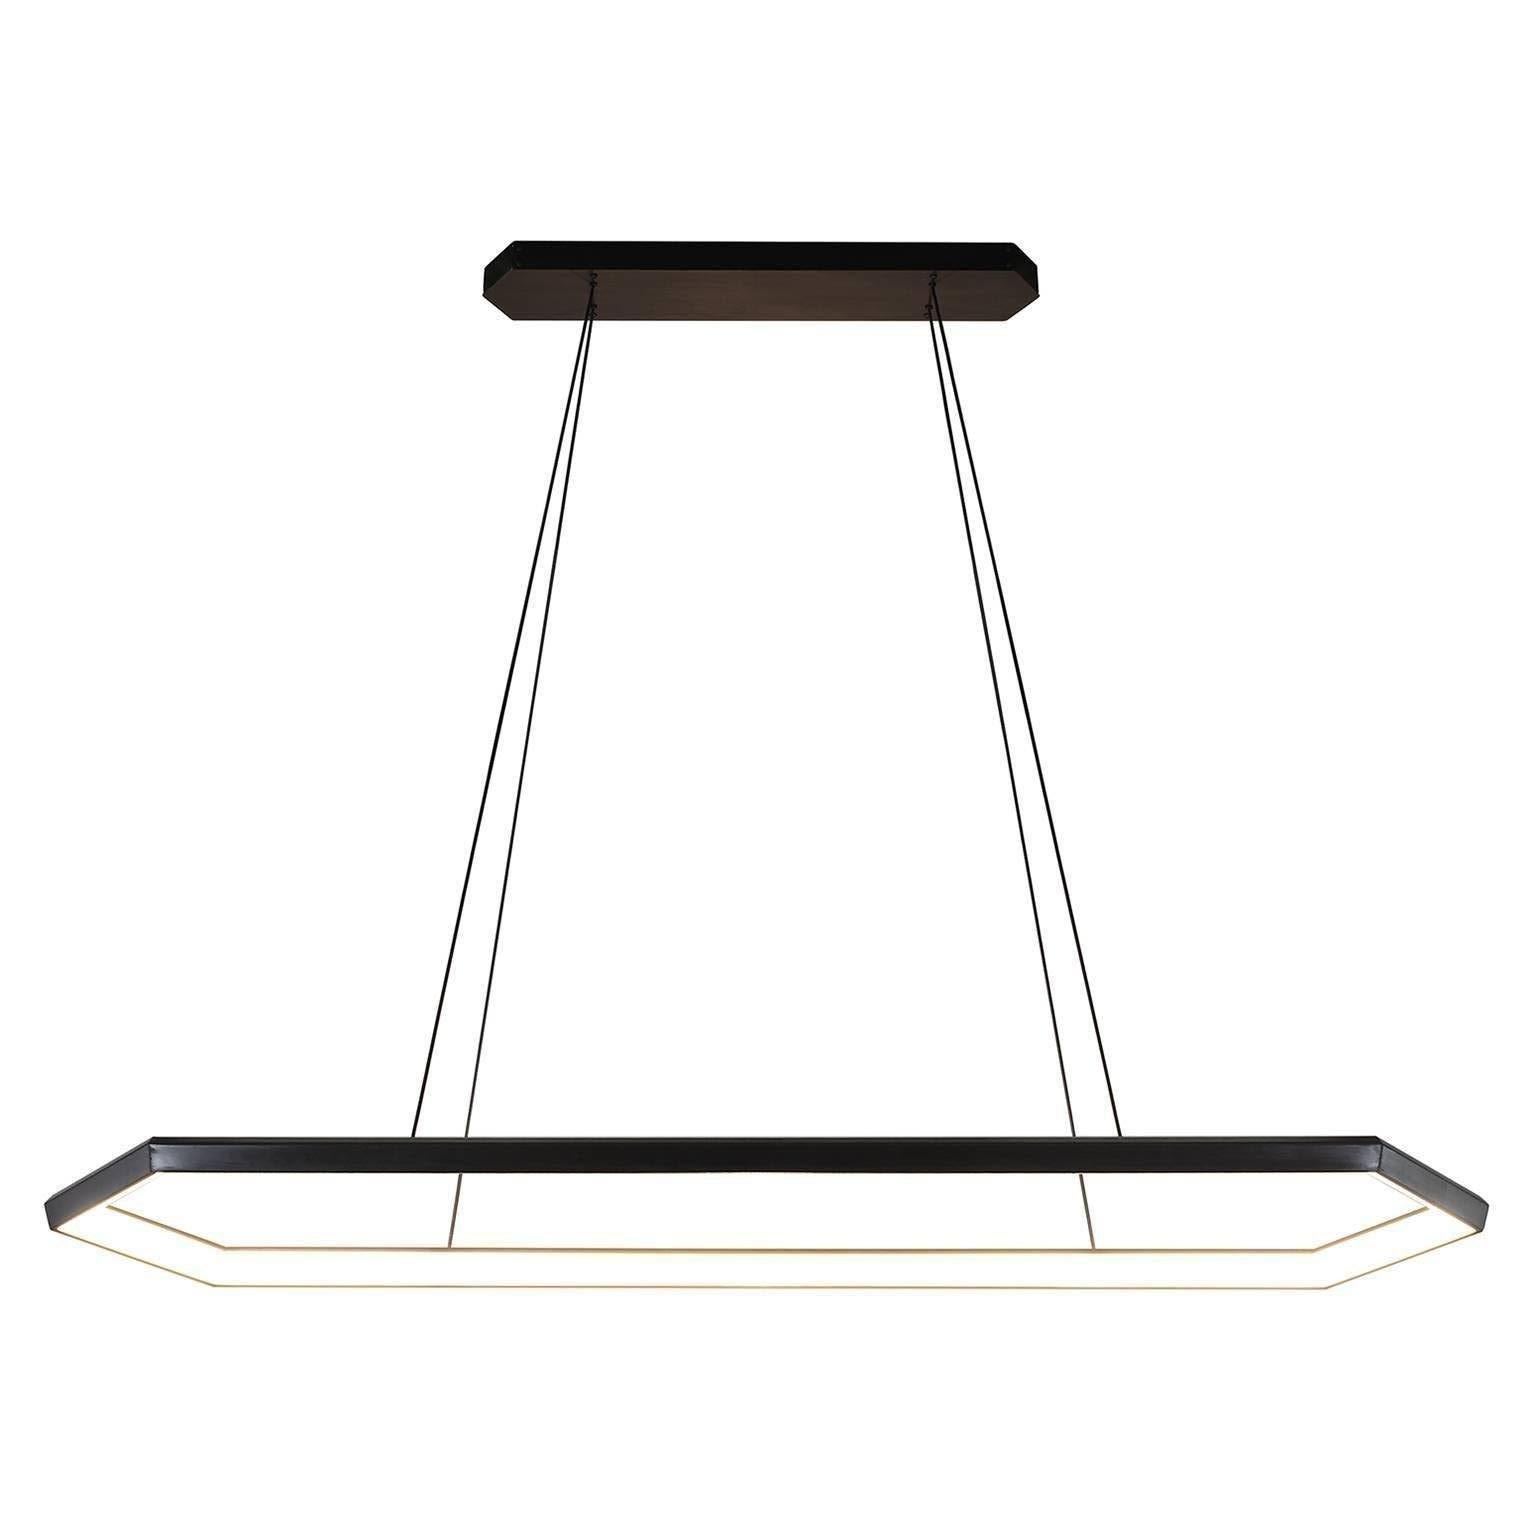 KRUOS LX58 has an elongated hexagonal form that provides a wide beam of light, perfect for adeptly illuminating workspaces, kitchens, and offices.

Metal Finish 
Powder-coat finishes available in Metallic Gold Powder-coat, Metallic Copper